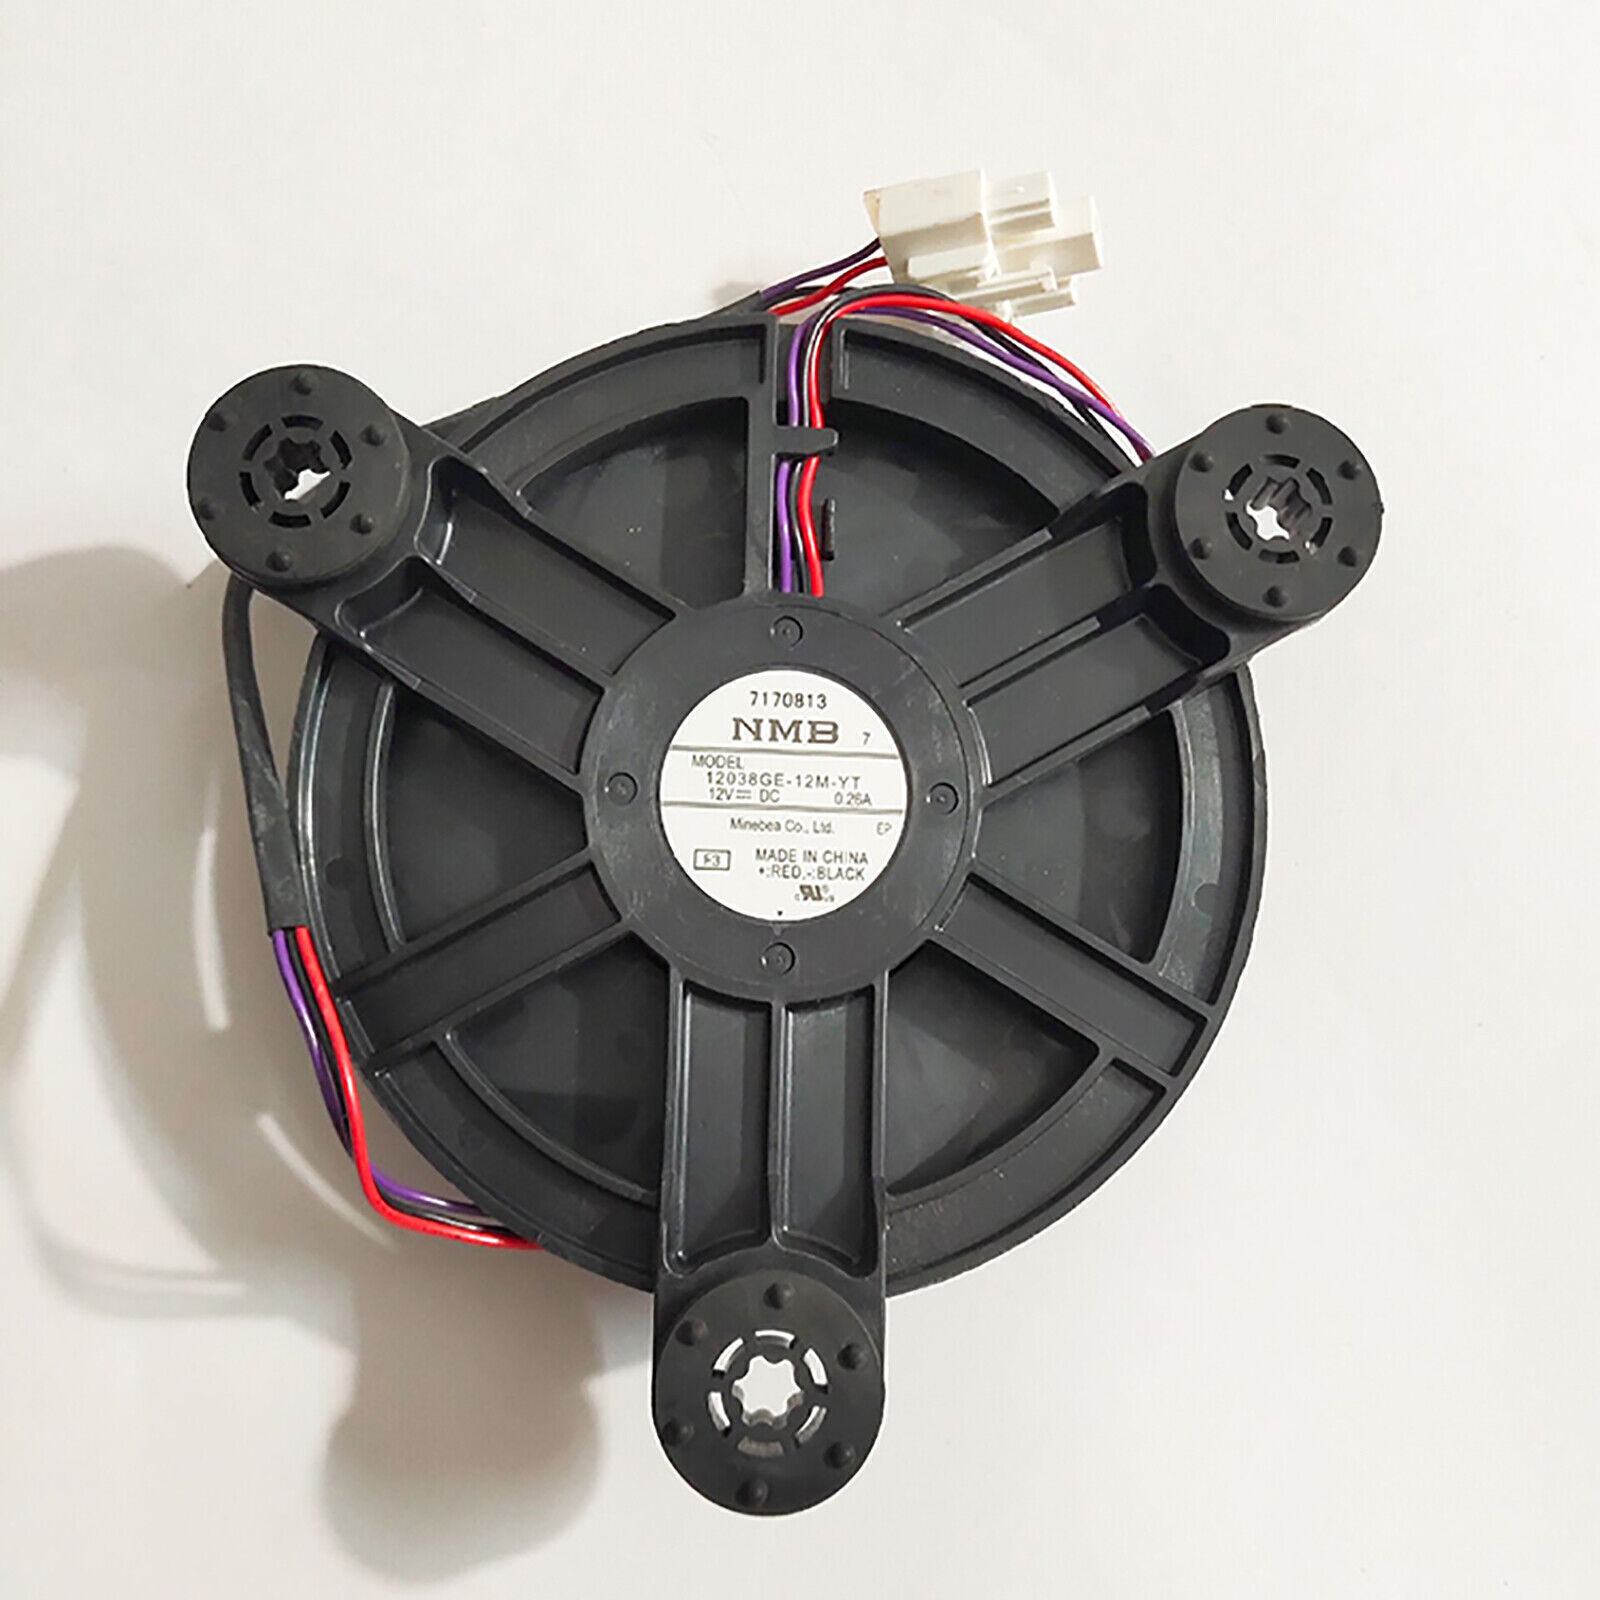 NMB 12038GE-12M-YT DC12V 0.26A Built-in Fan Part for Refrigerator Cooling Fan